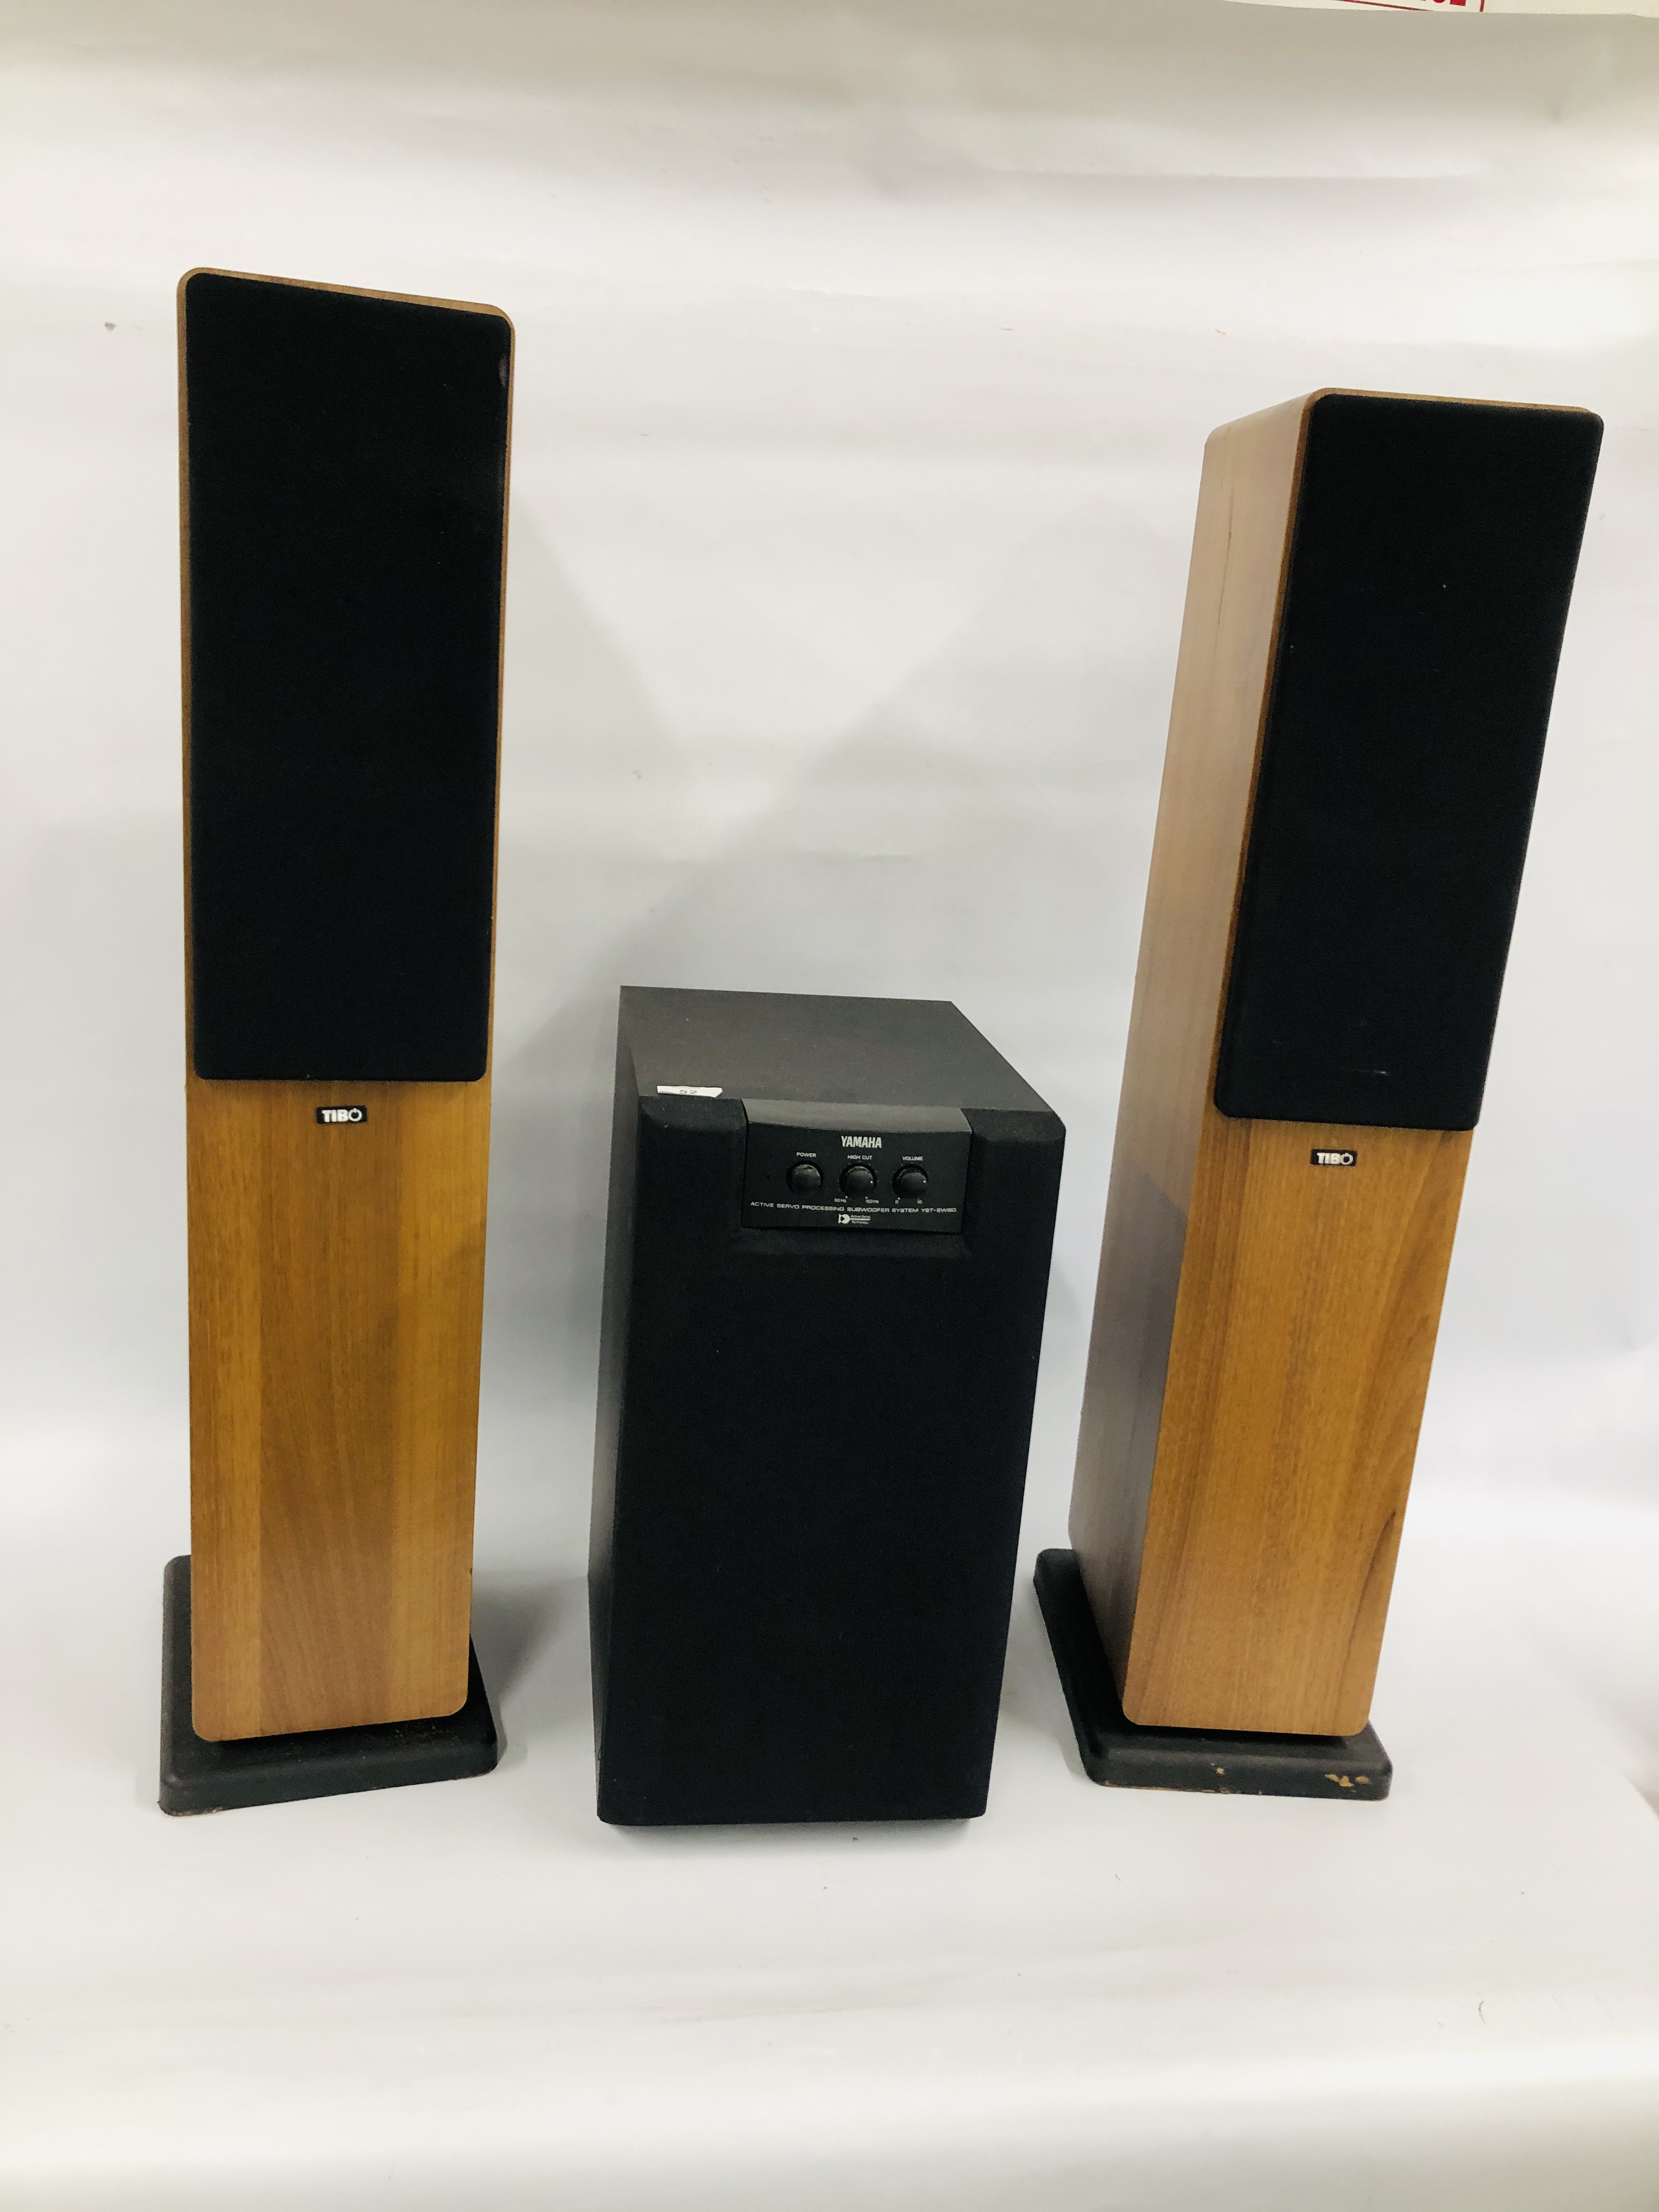 YAMAHA ACTIVE SERVO PROCESSING SUBWOOFER SYSTEM XST-SW80 ALONG WITH A PAIR OF FLOOR STANDING TIB